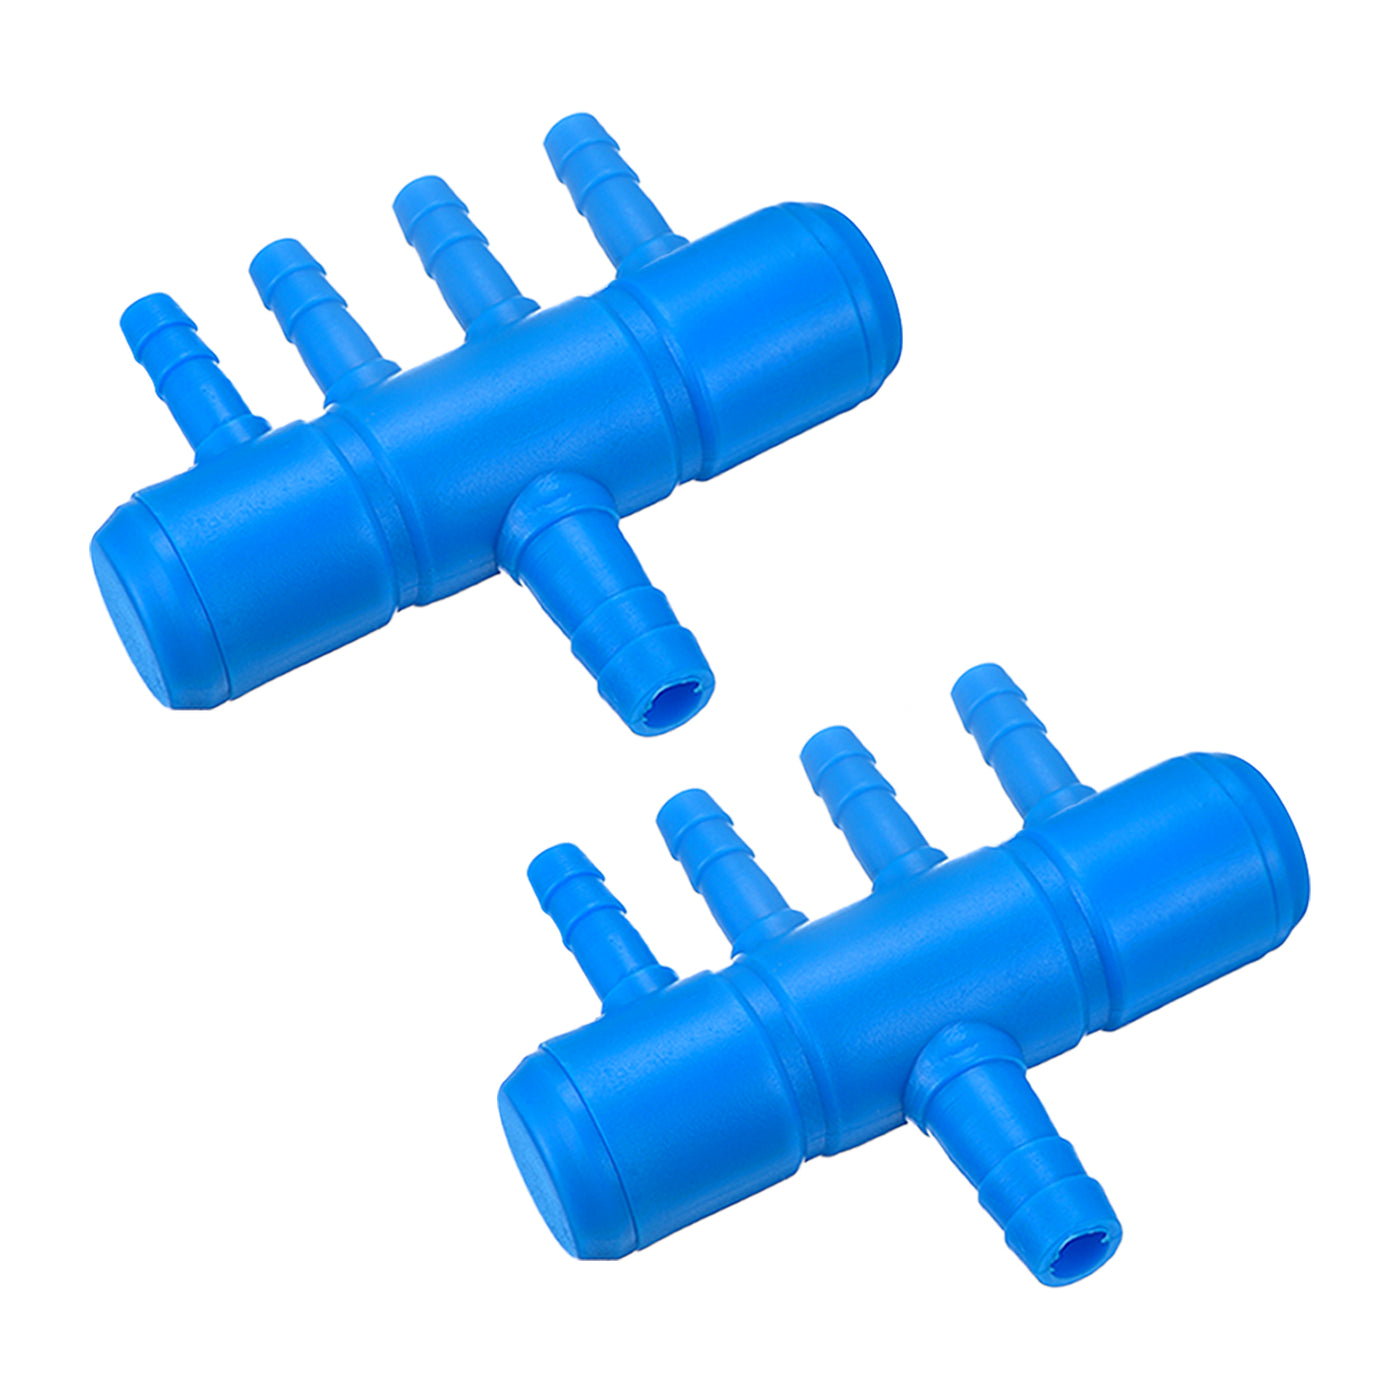 uxcell Uxcell Air Line Tubing Splitter Connector, 2Pcs 8mm/0.31" to 5mm/0.2" 4 Way, Blue